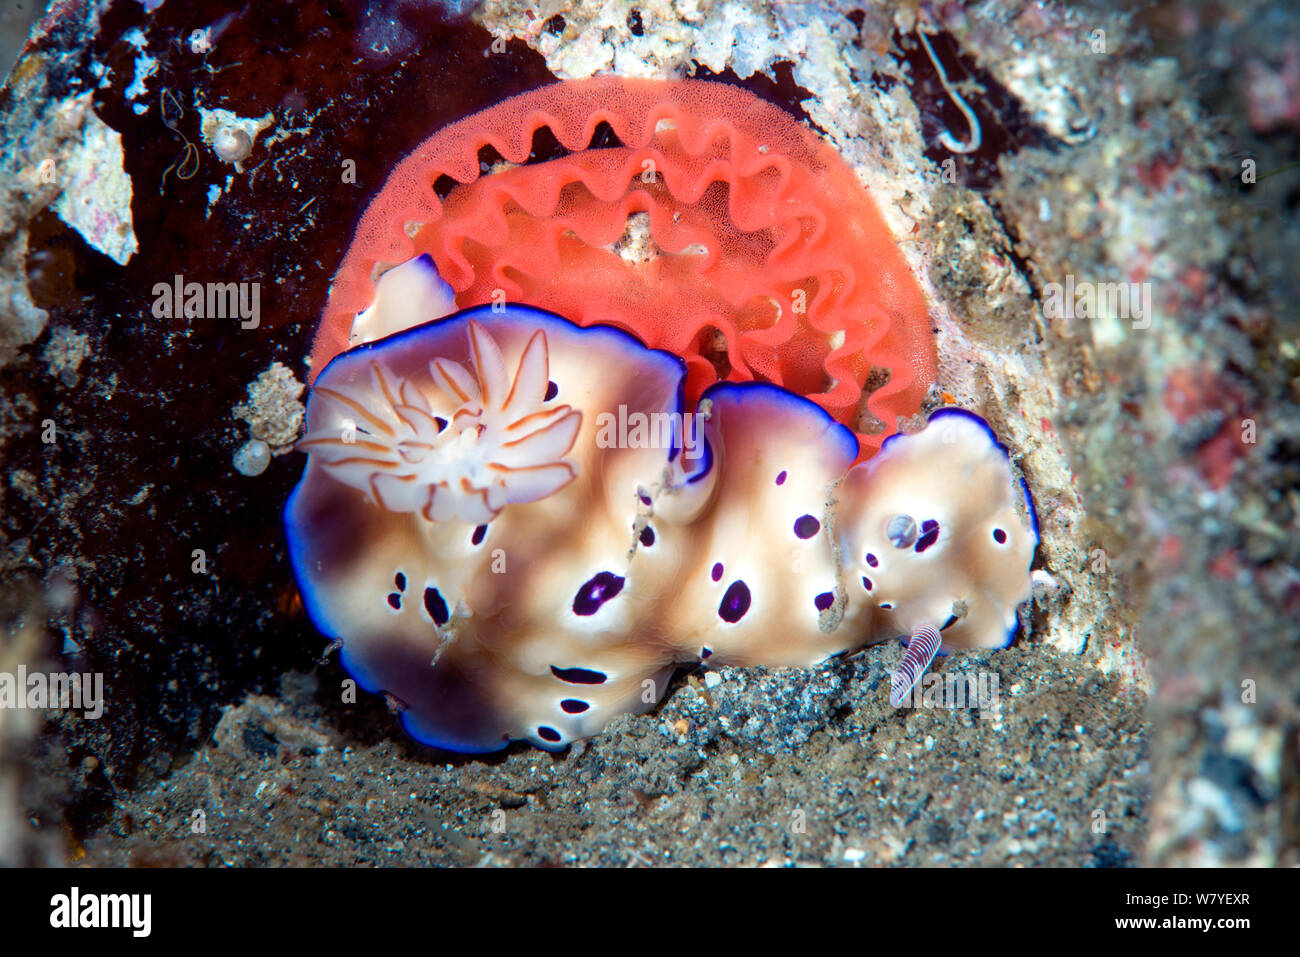 Chromodorid nudibranch (Risbecia tryoni) laying a red egg ribbon, Lembeh Strait, North Sulawesi, Indonesia. Stock Photo